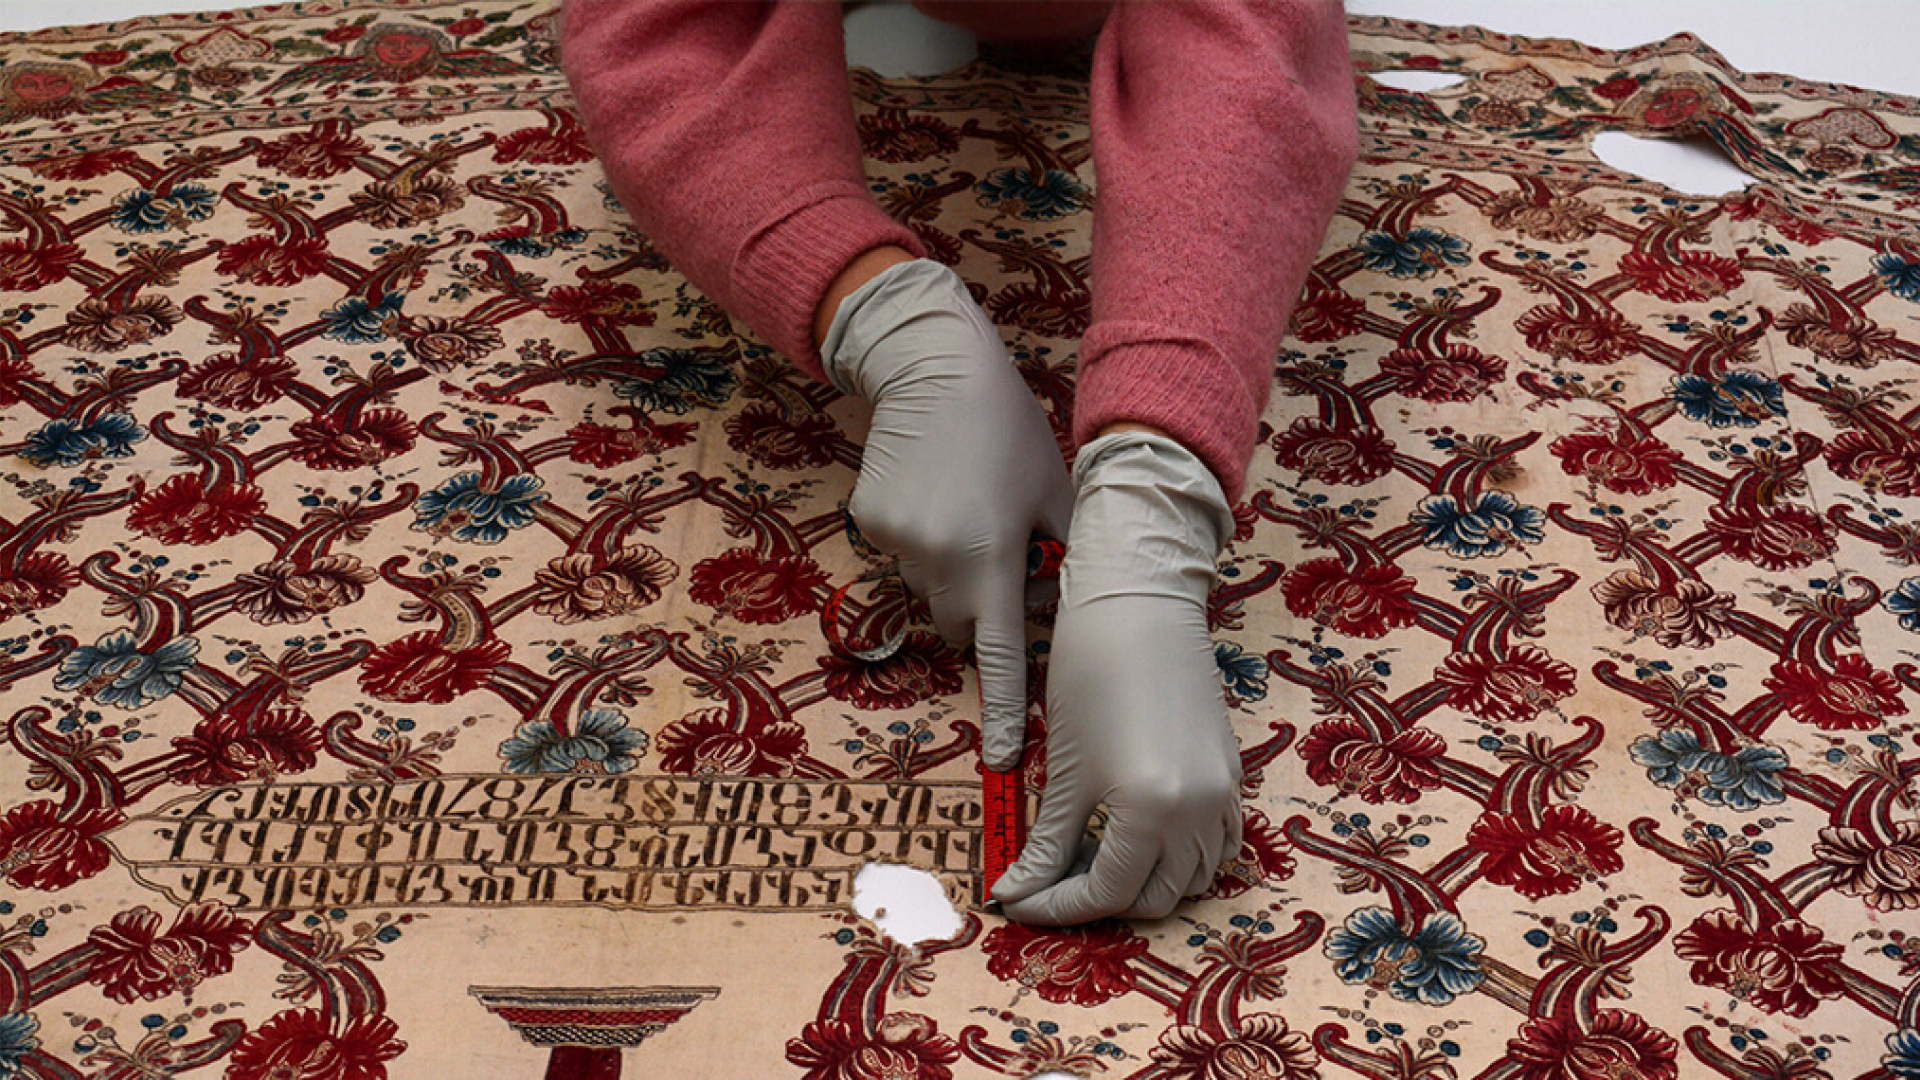 A person wearing medical gloves takes measurements on the surface of the cope.